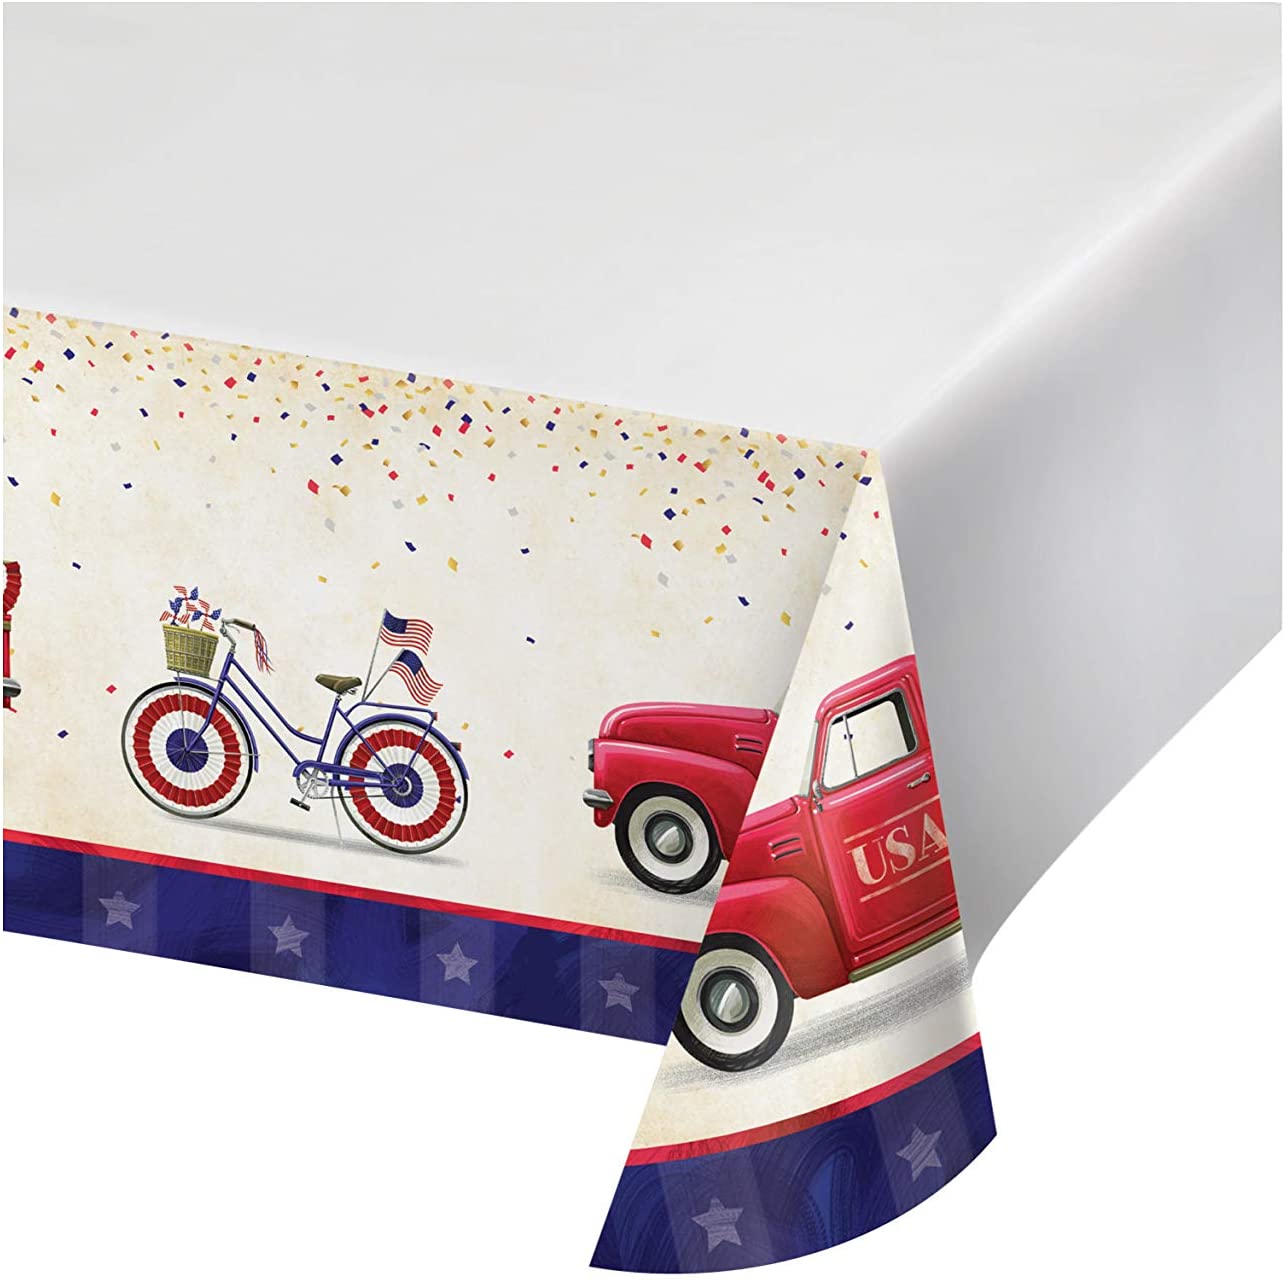 Patriotic Parade Paper Disposable Table Cover 54 X 102 inch – 1 Piece